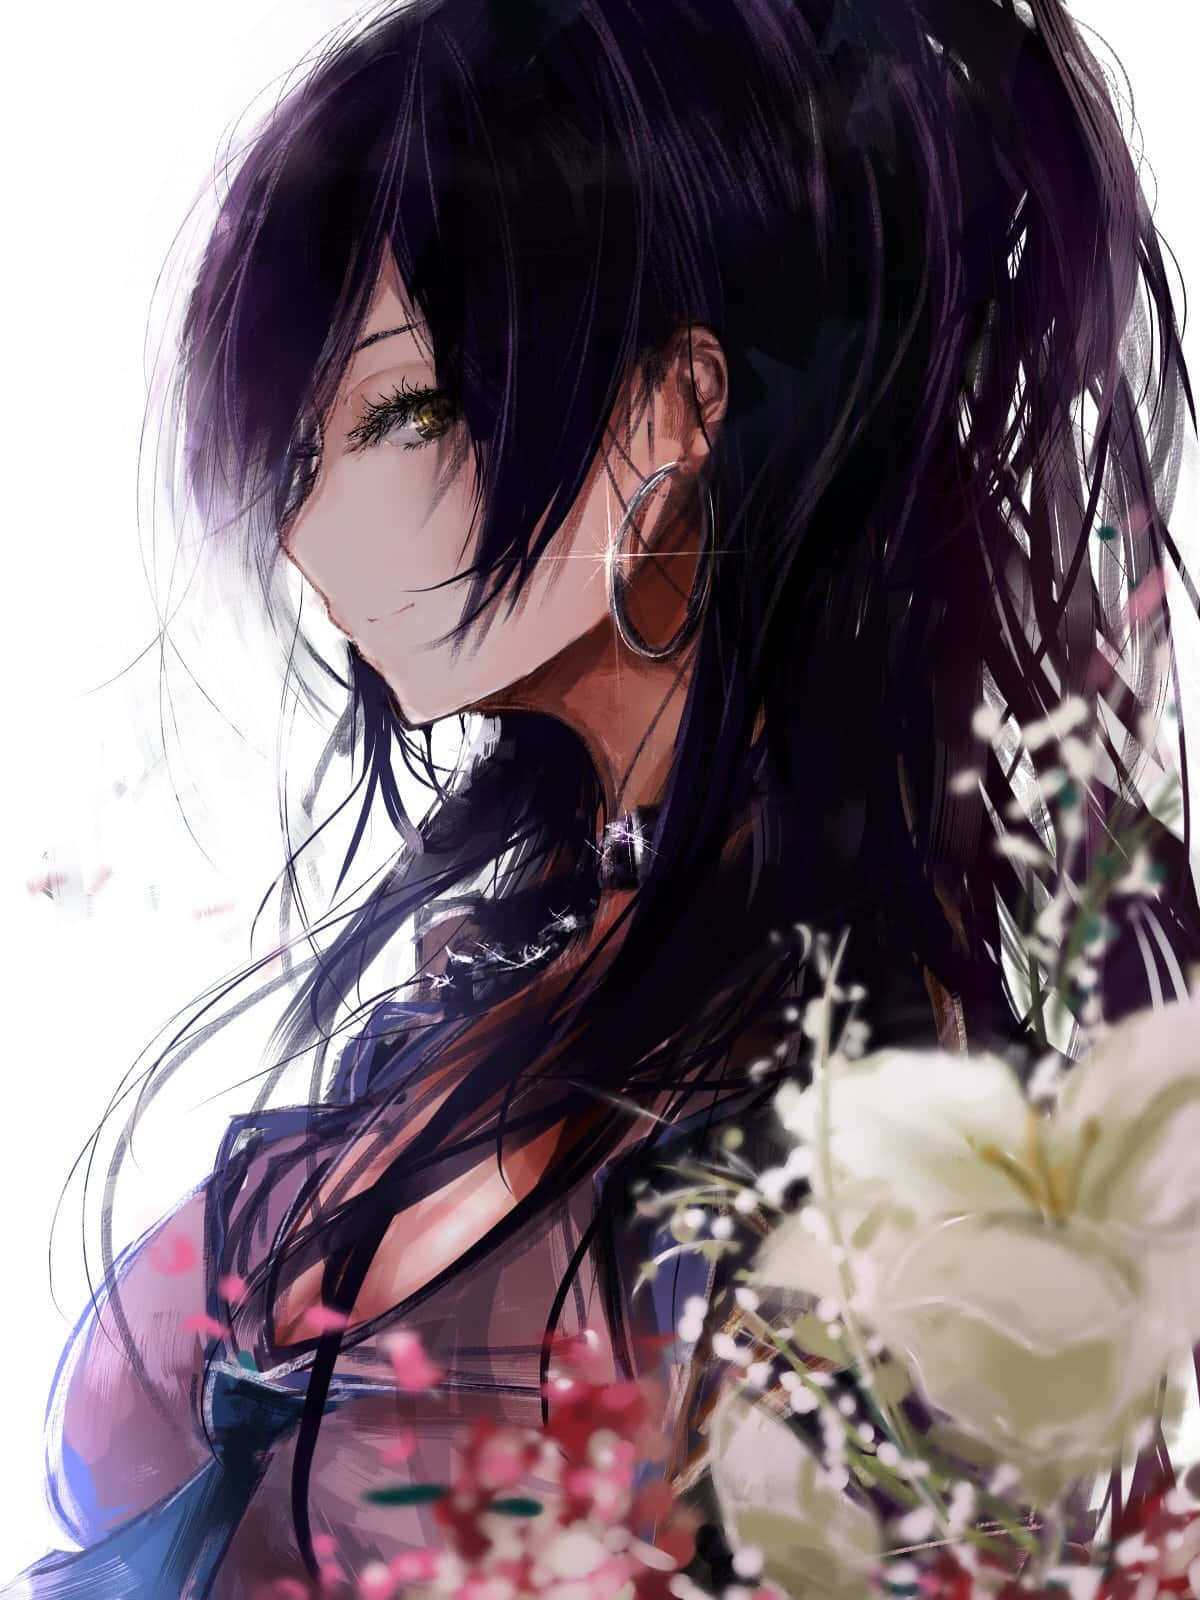 anime profile pictures, purple and black, black hair